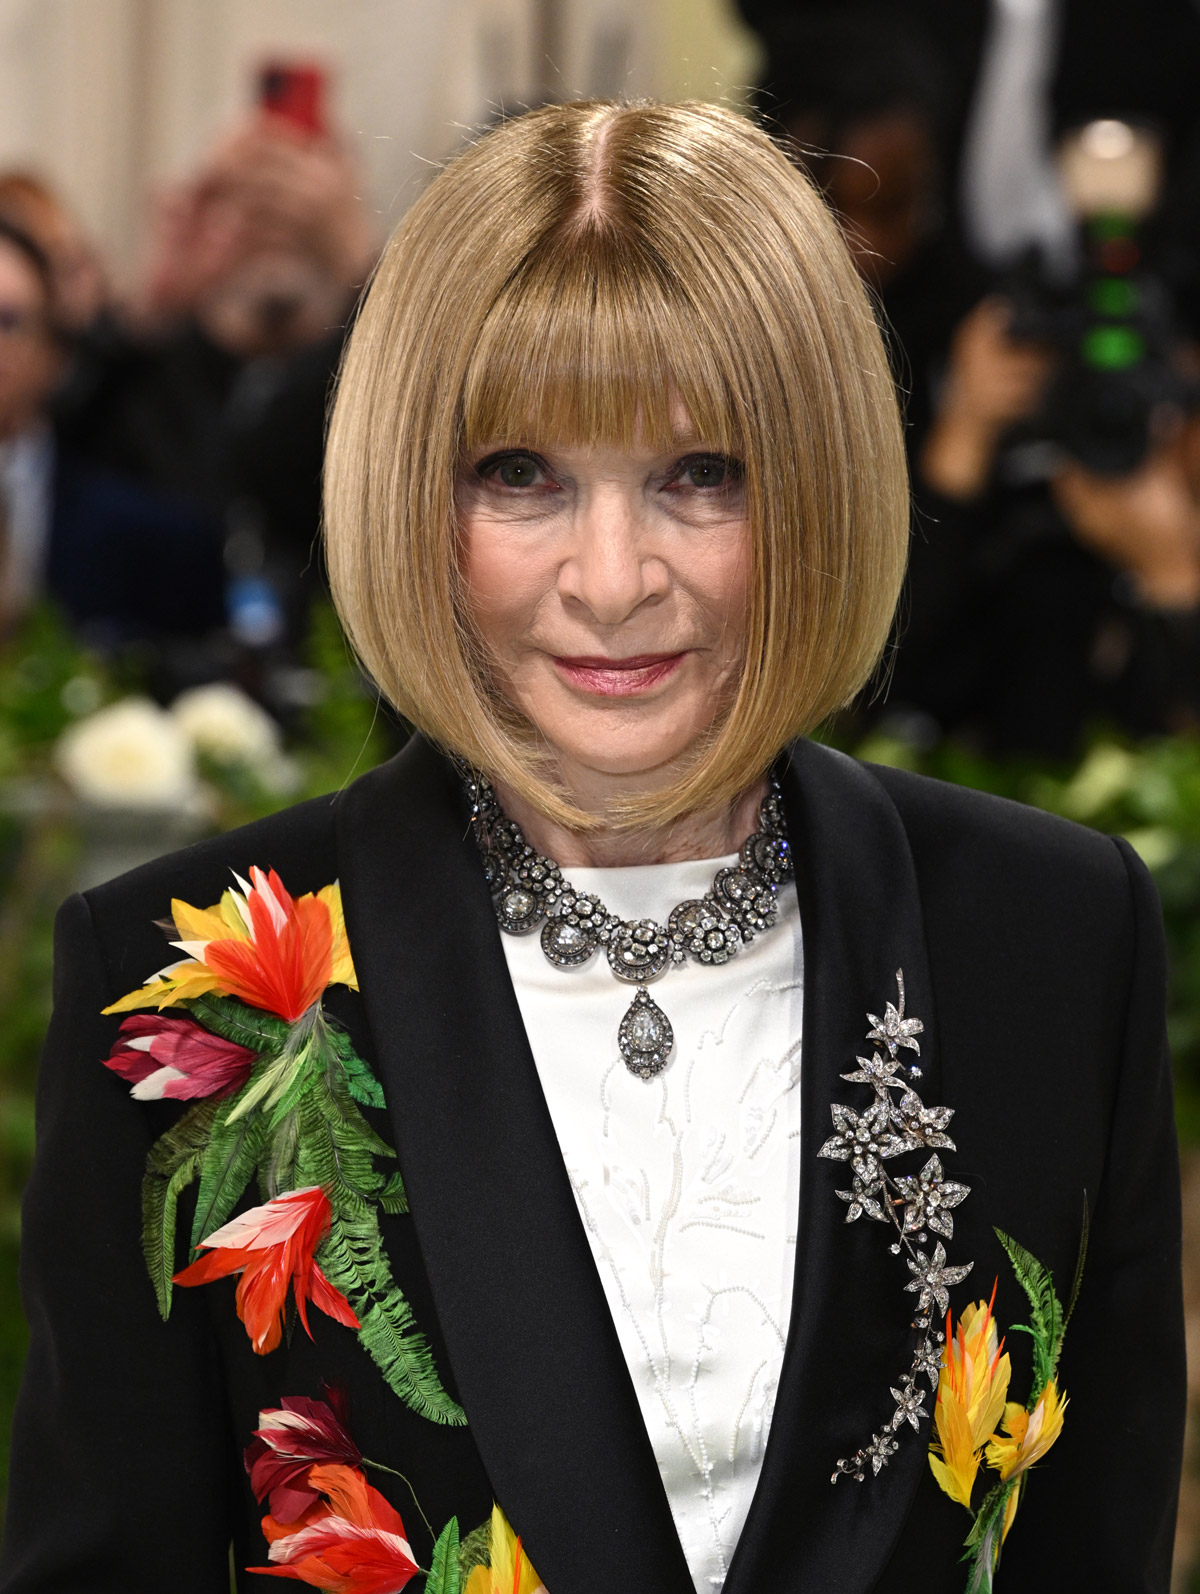 Anna Wintour banned garlic, onion, parsley and chives from the Met Gala dinner